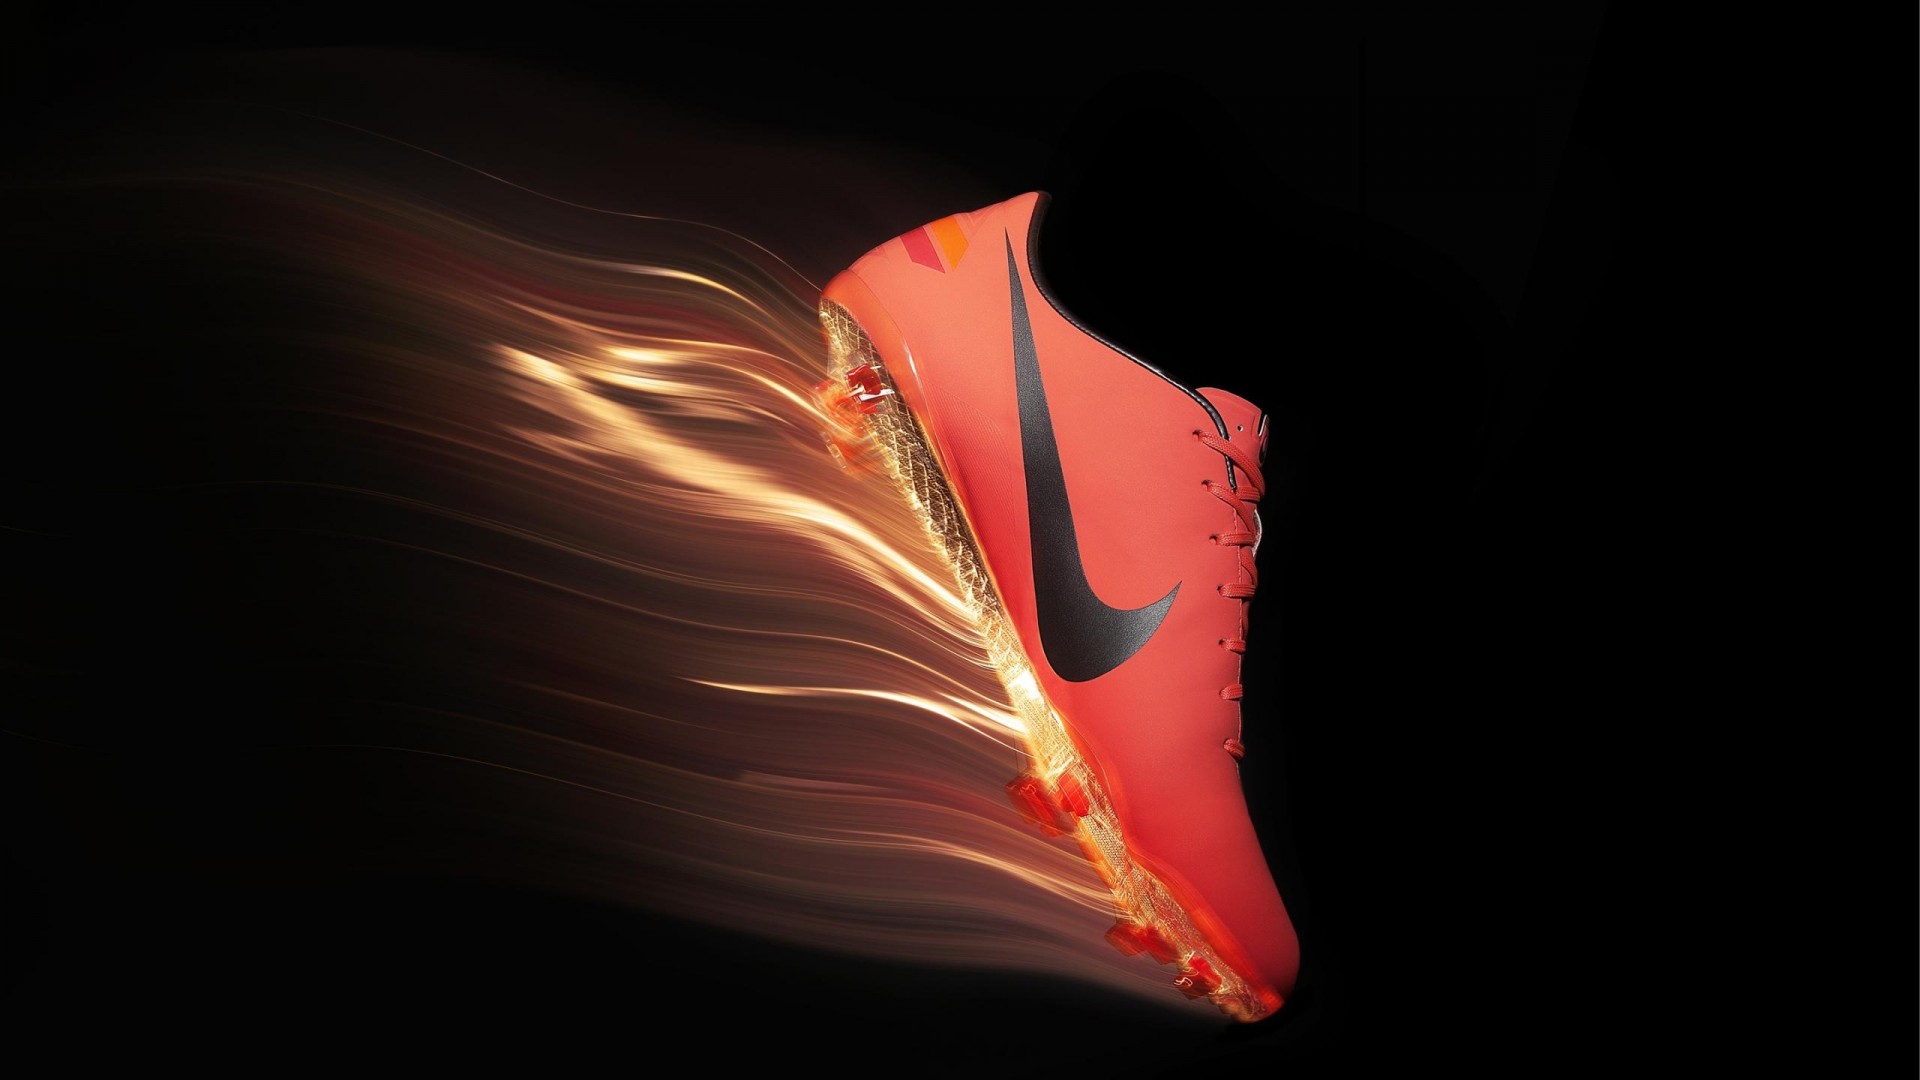 Mobile wallpaper: Nike, 3D, Products, Cgi, 1024977 download the